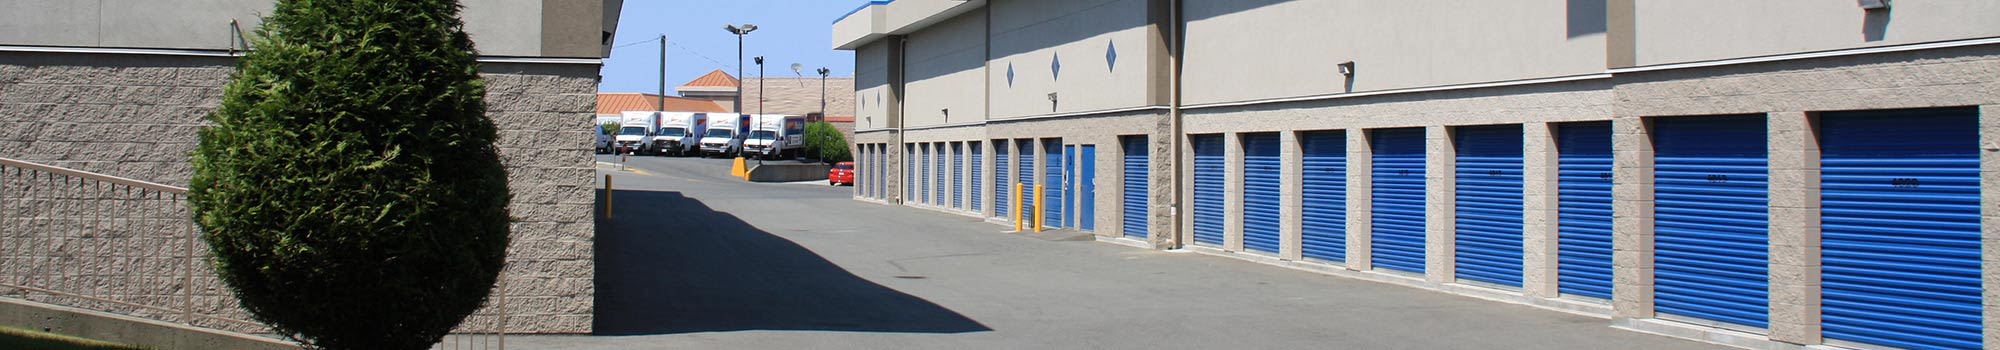 Update your contact information at Budget Self Storage